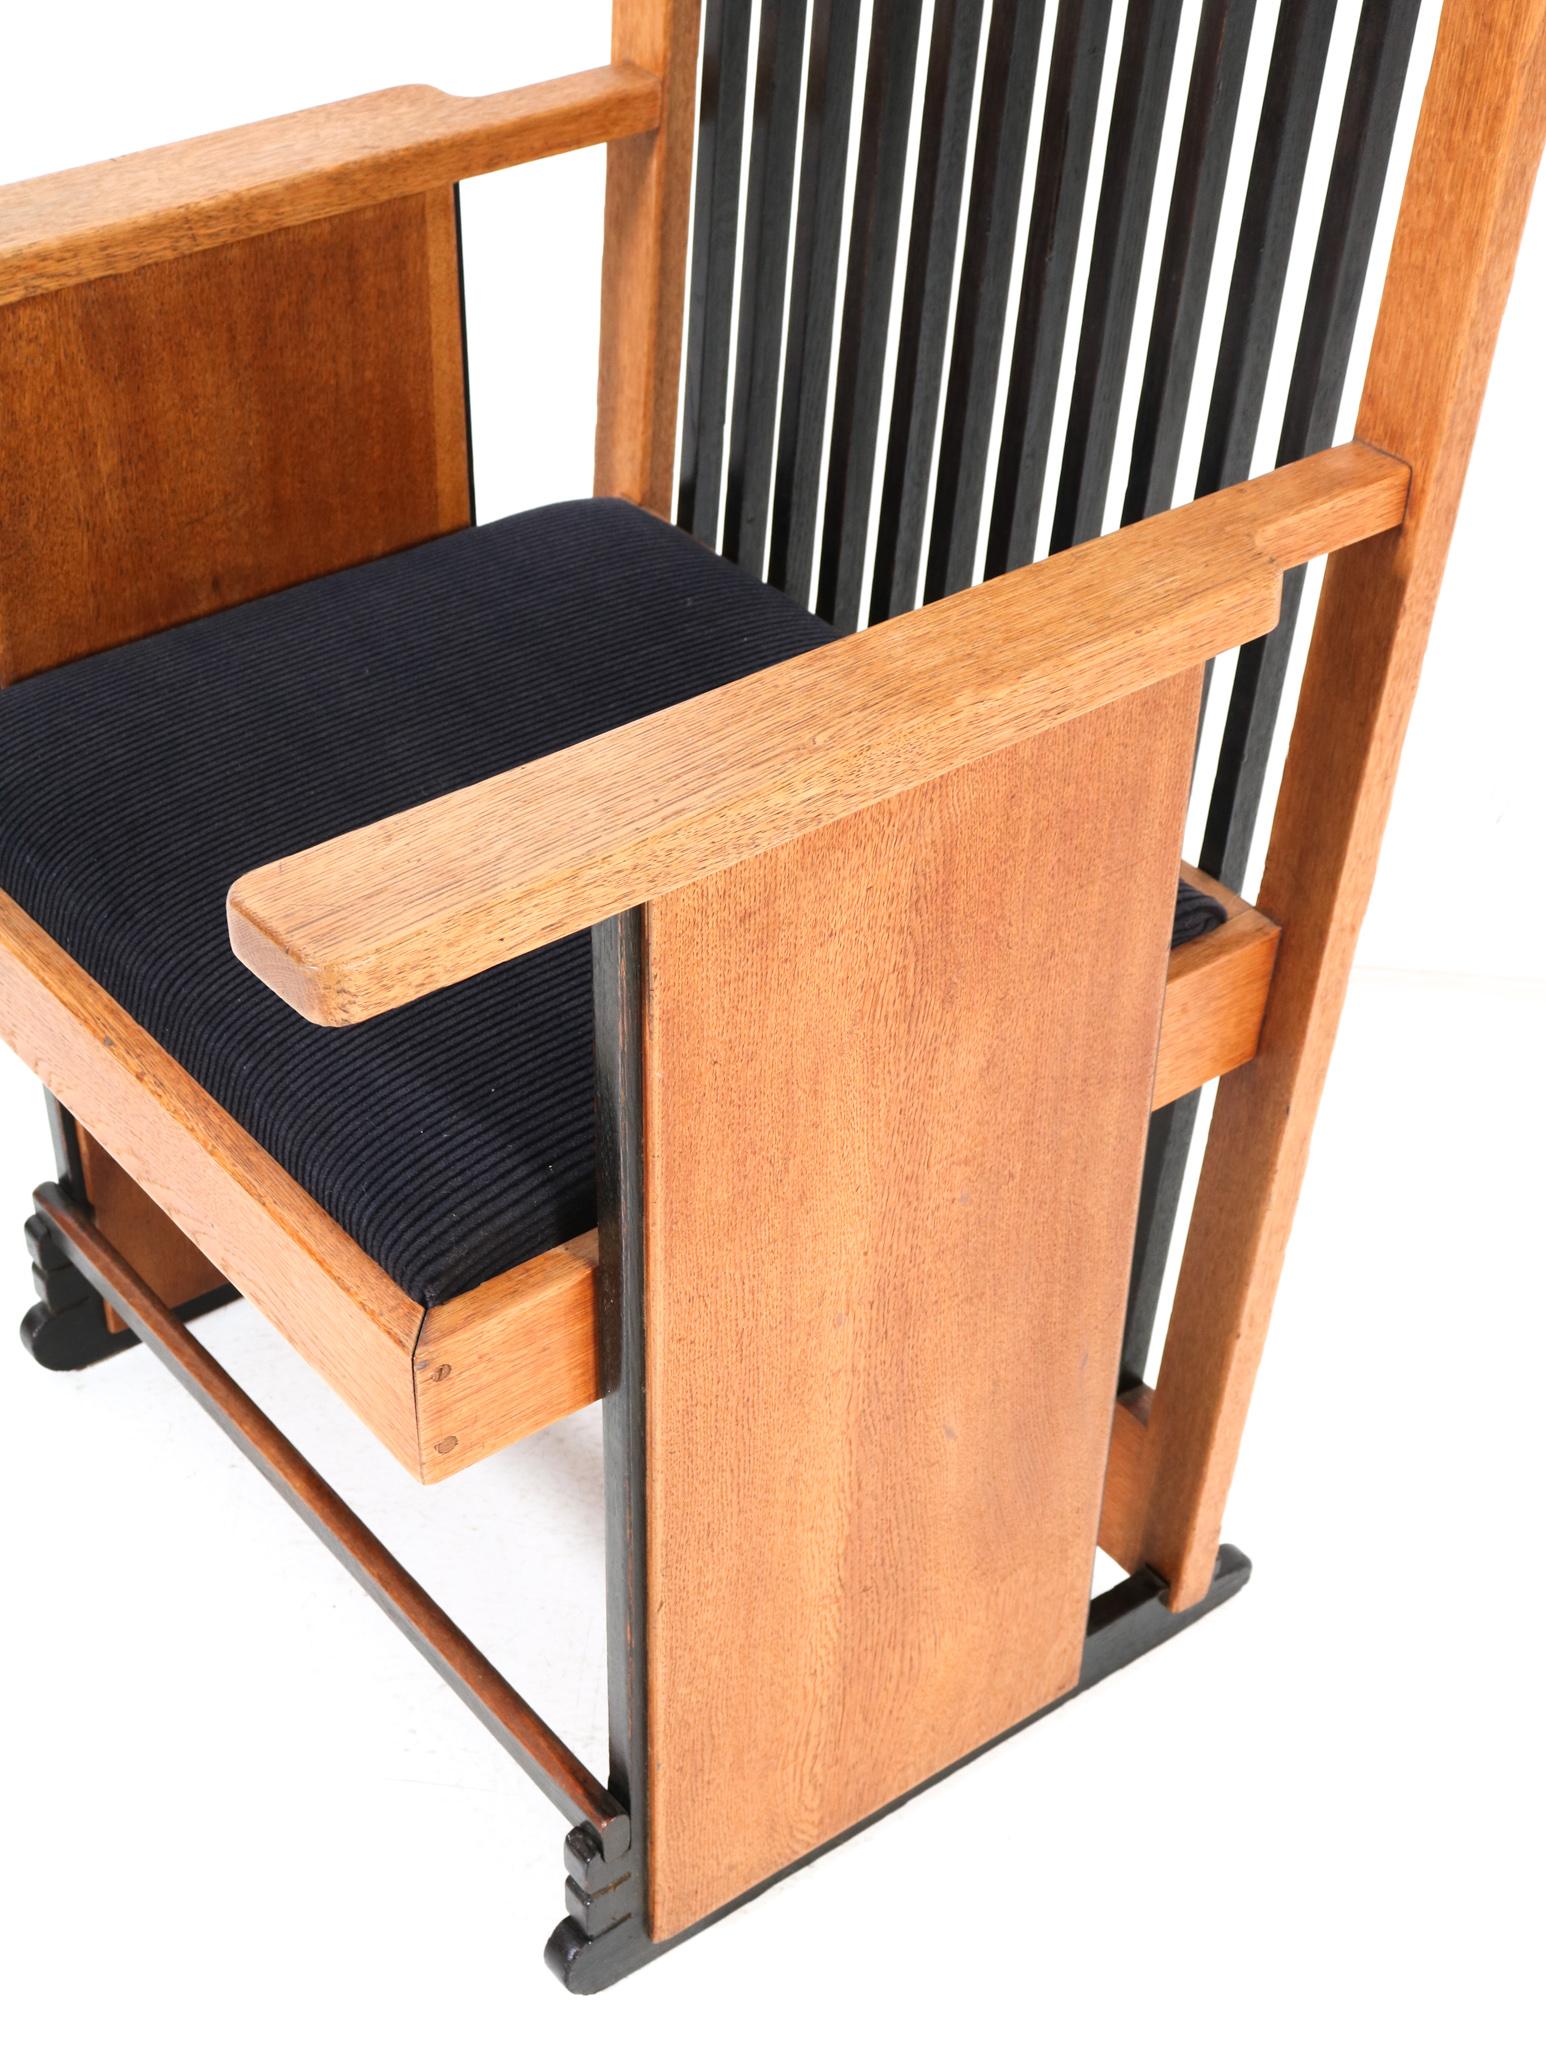  Oak Art Deco Modernist High Back Dining Room Chairs by Architect Caspers, 1920s For Sale 13